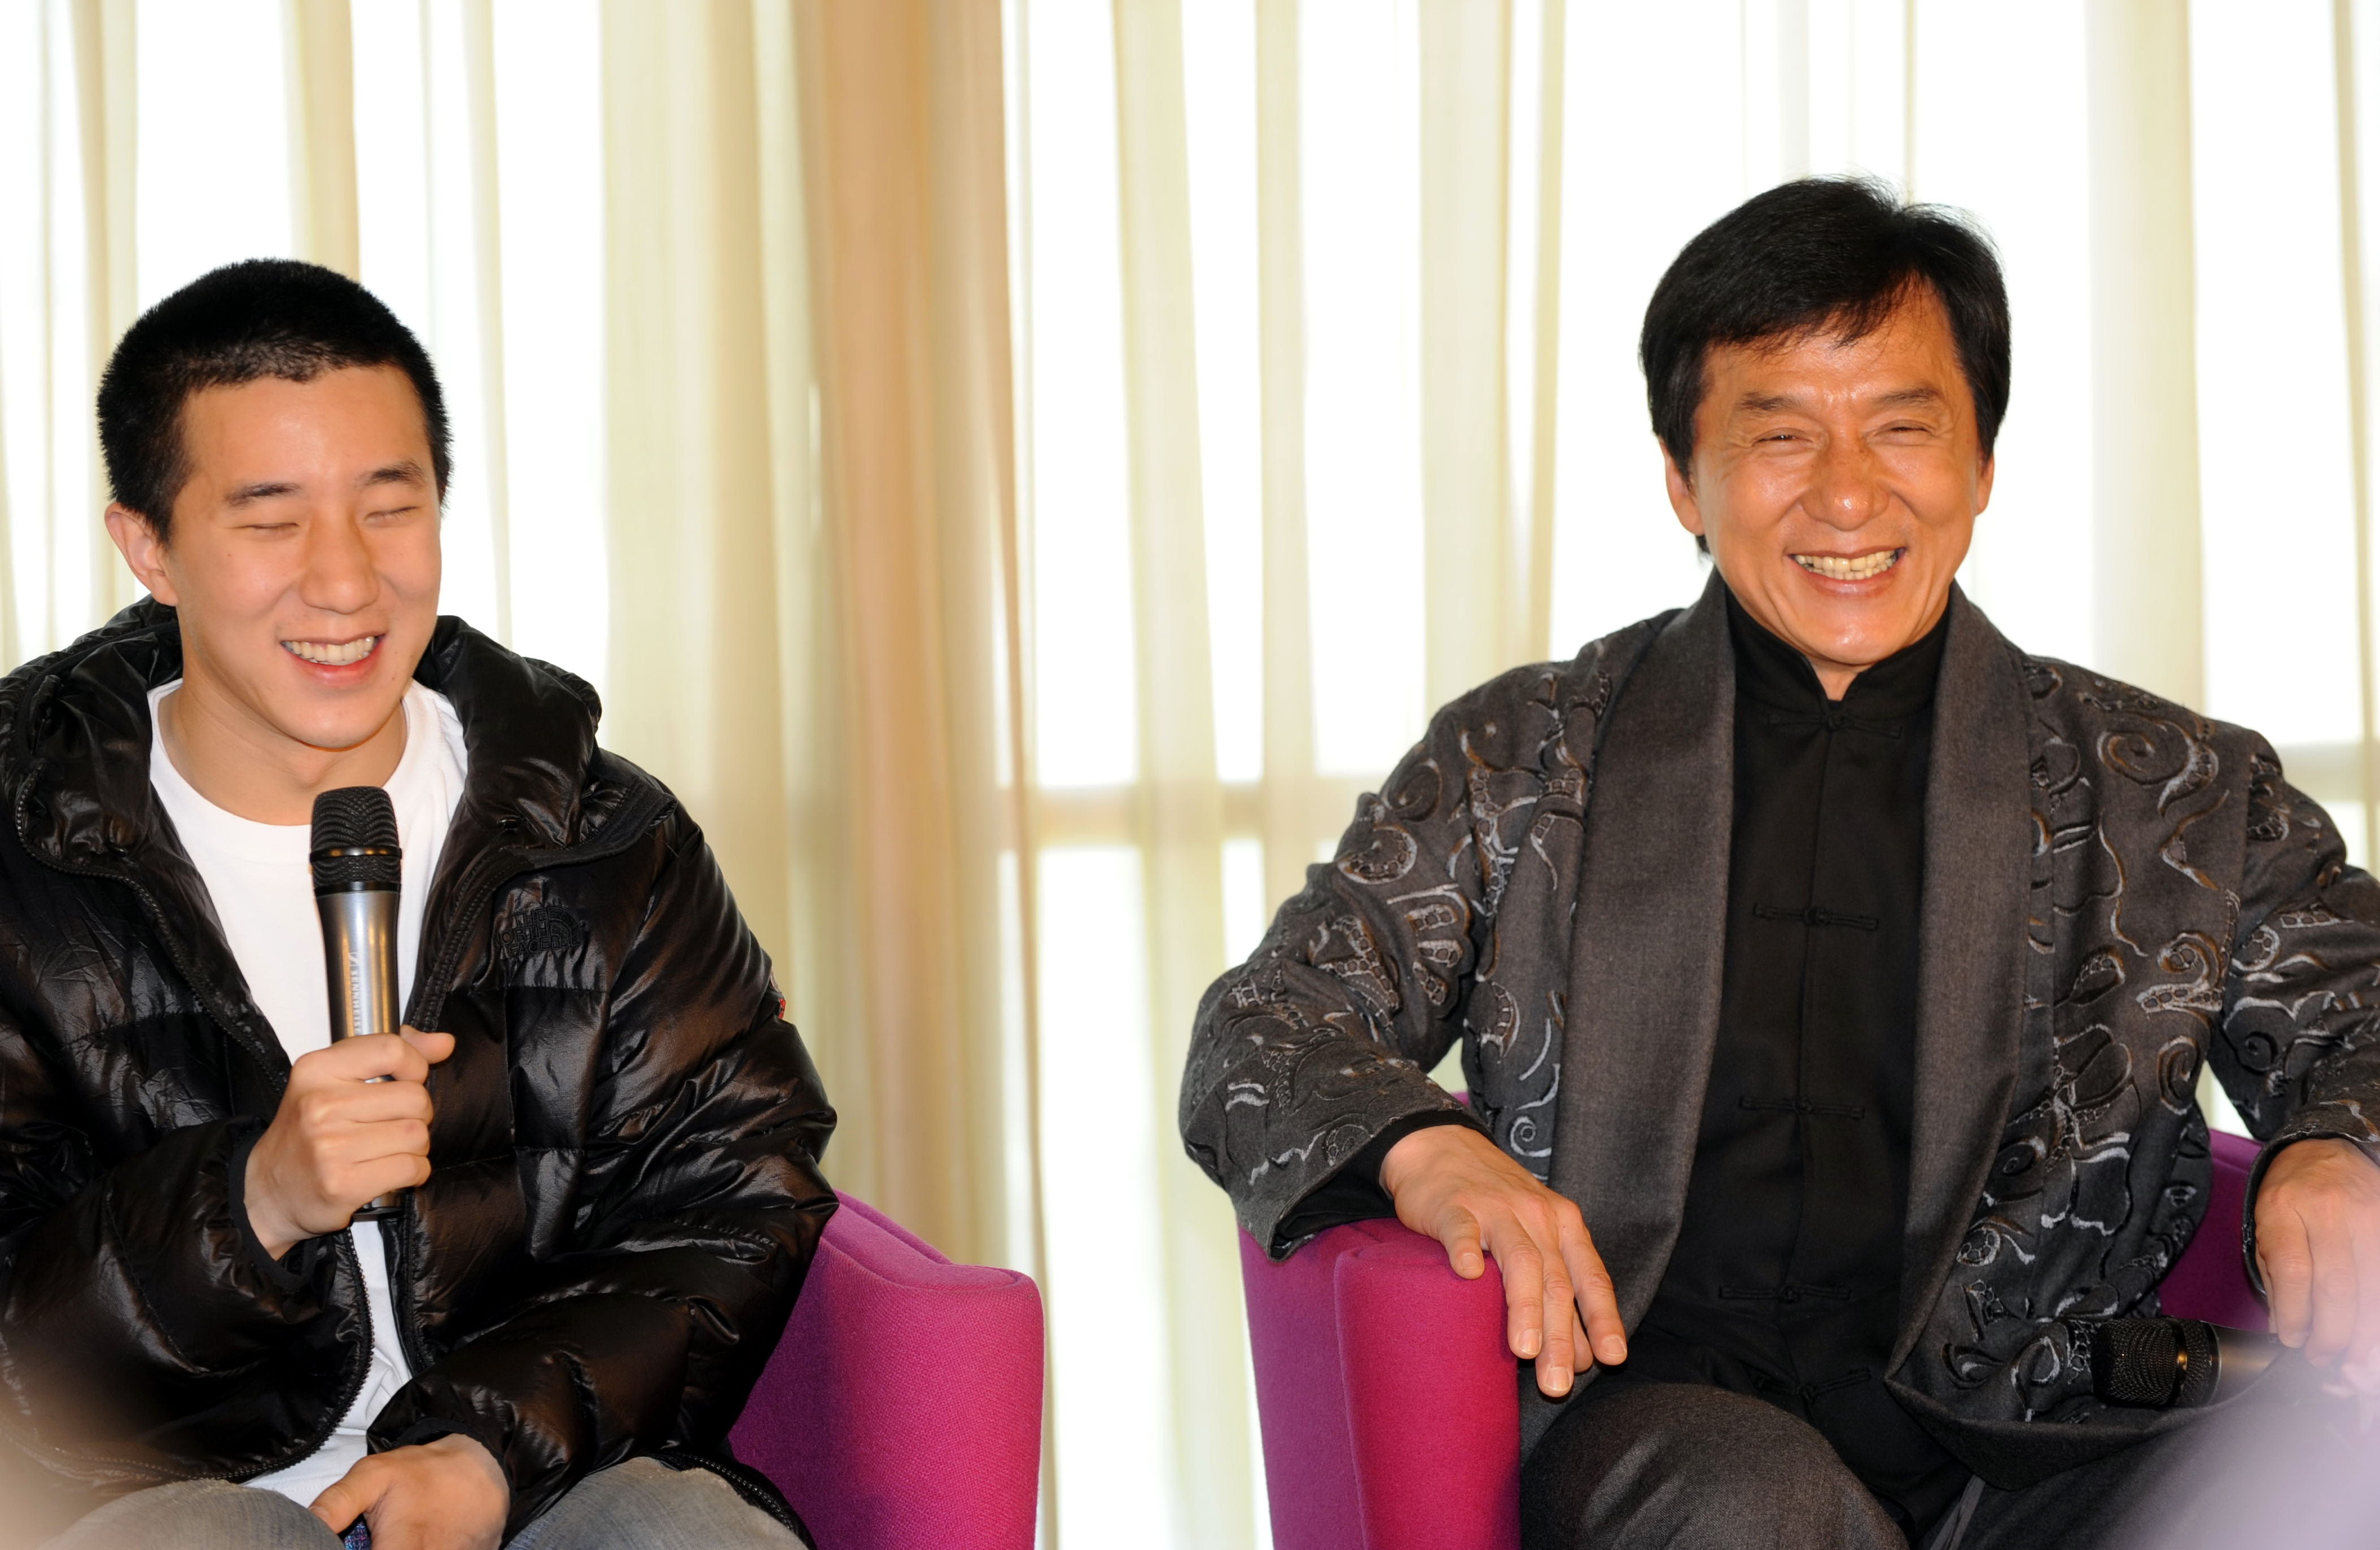 Jackie Chan and his son Jaycee Chan attend a press conference on April 1, 2009 in Beijing, China | Source: Getty Images